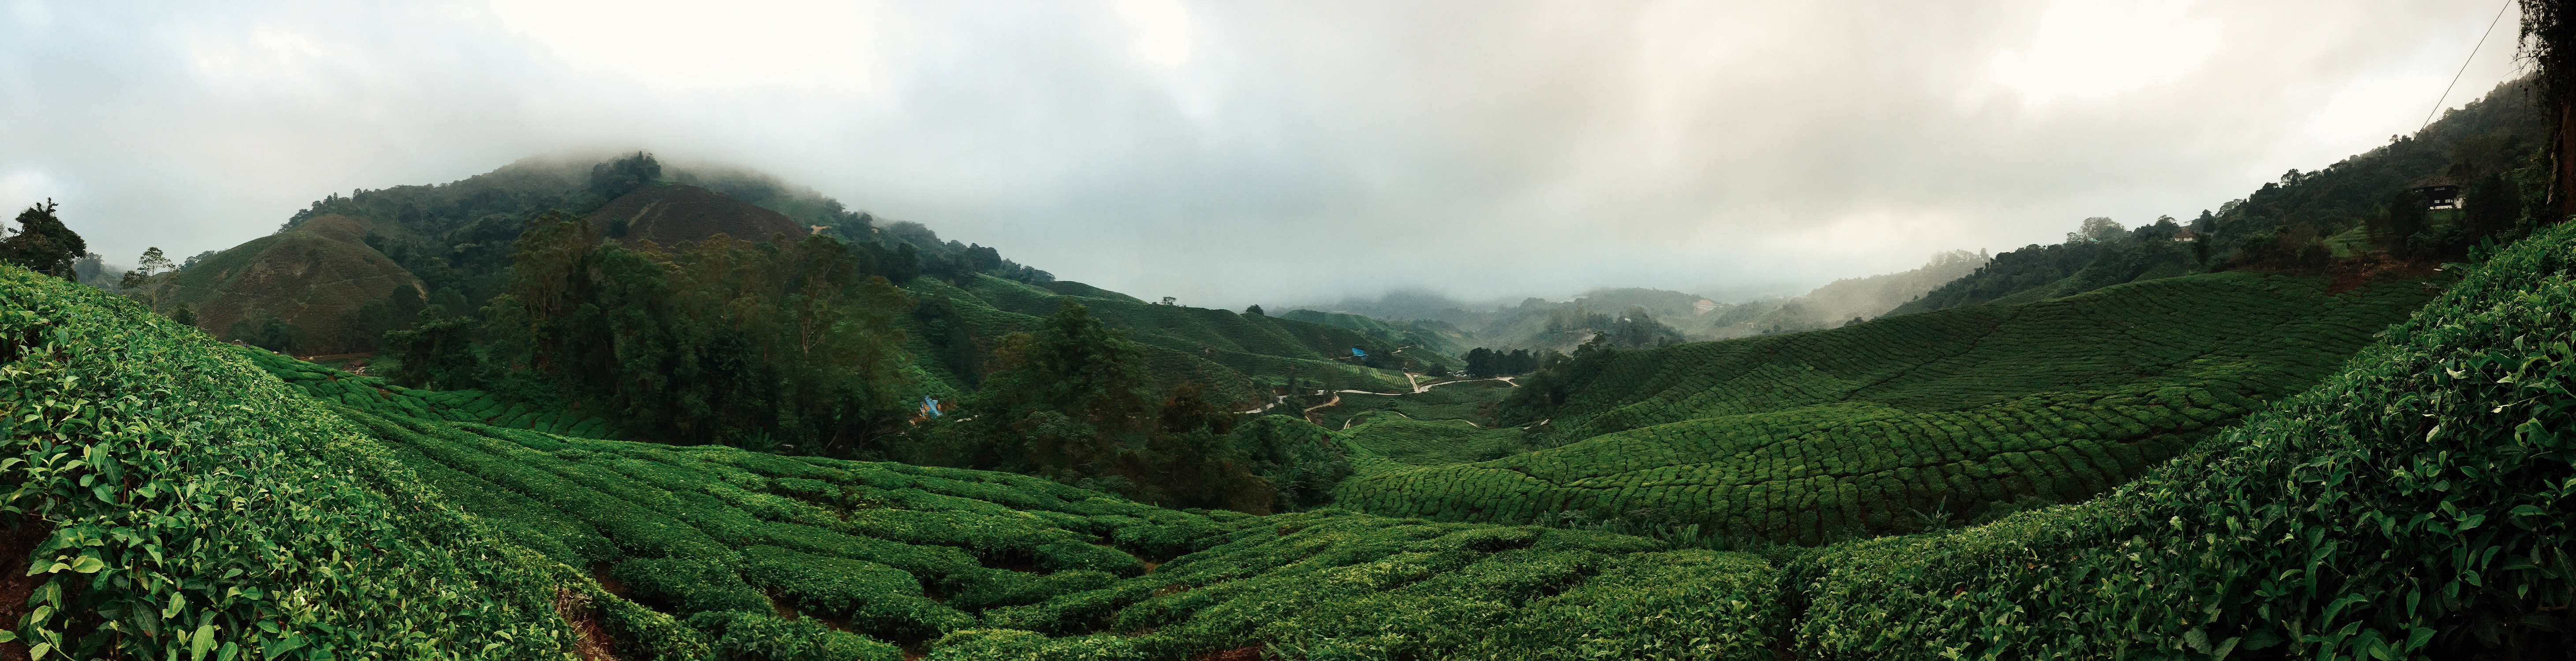 We crawled out of our beds in the wee hours of the morning, braved the narrow, muddy roads leading into the depths of the tea plantation.